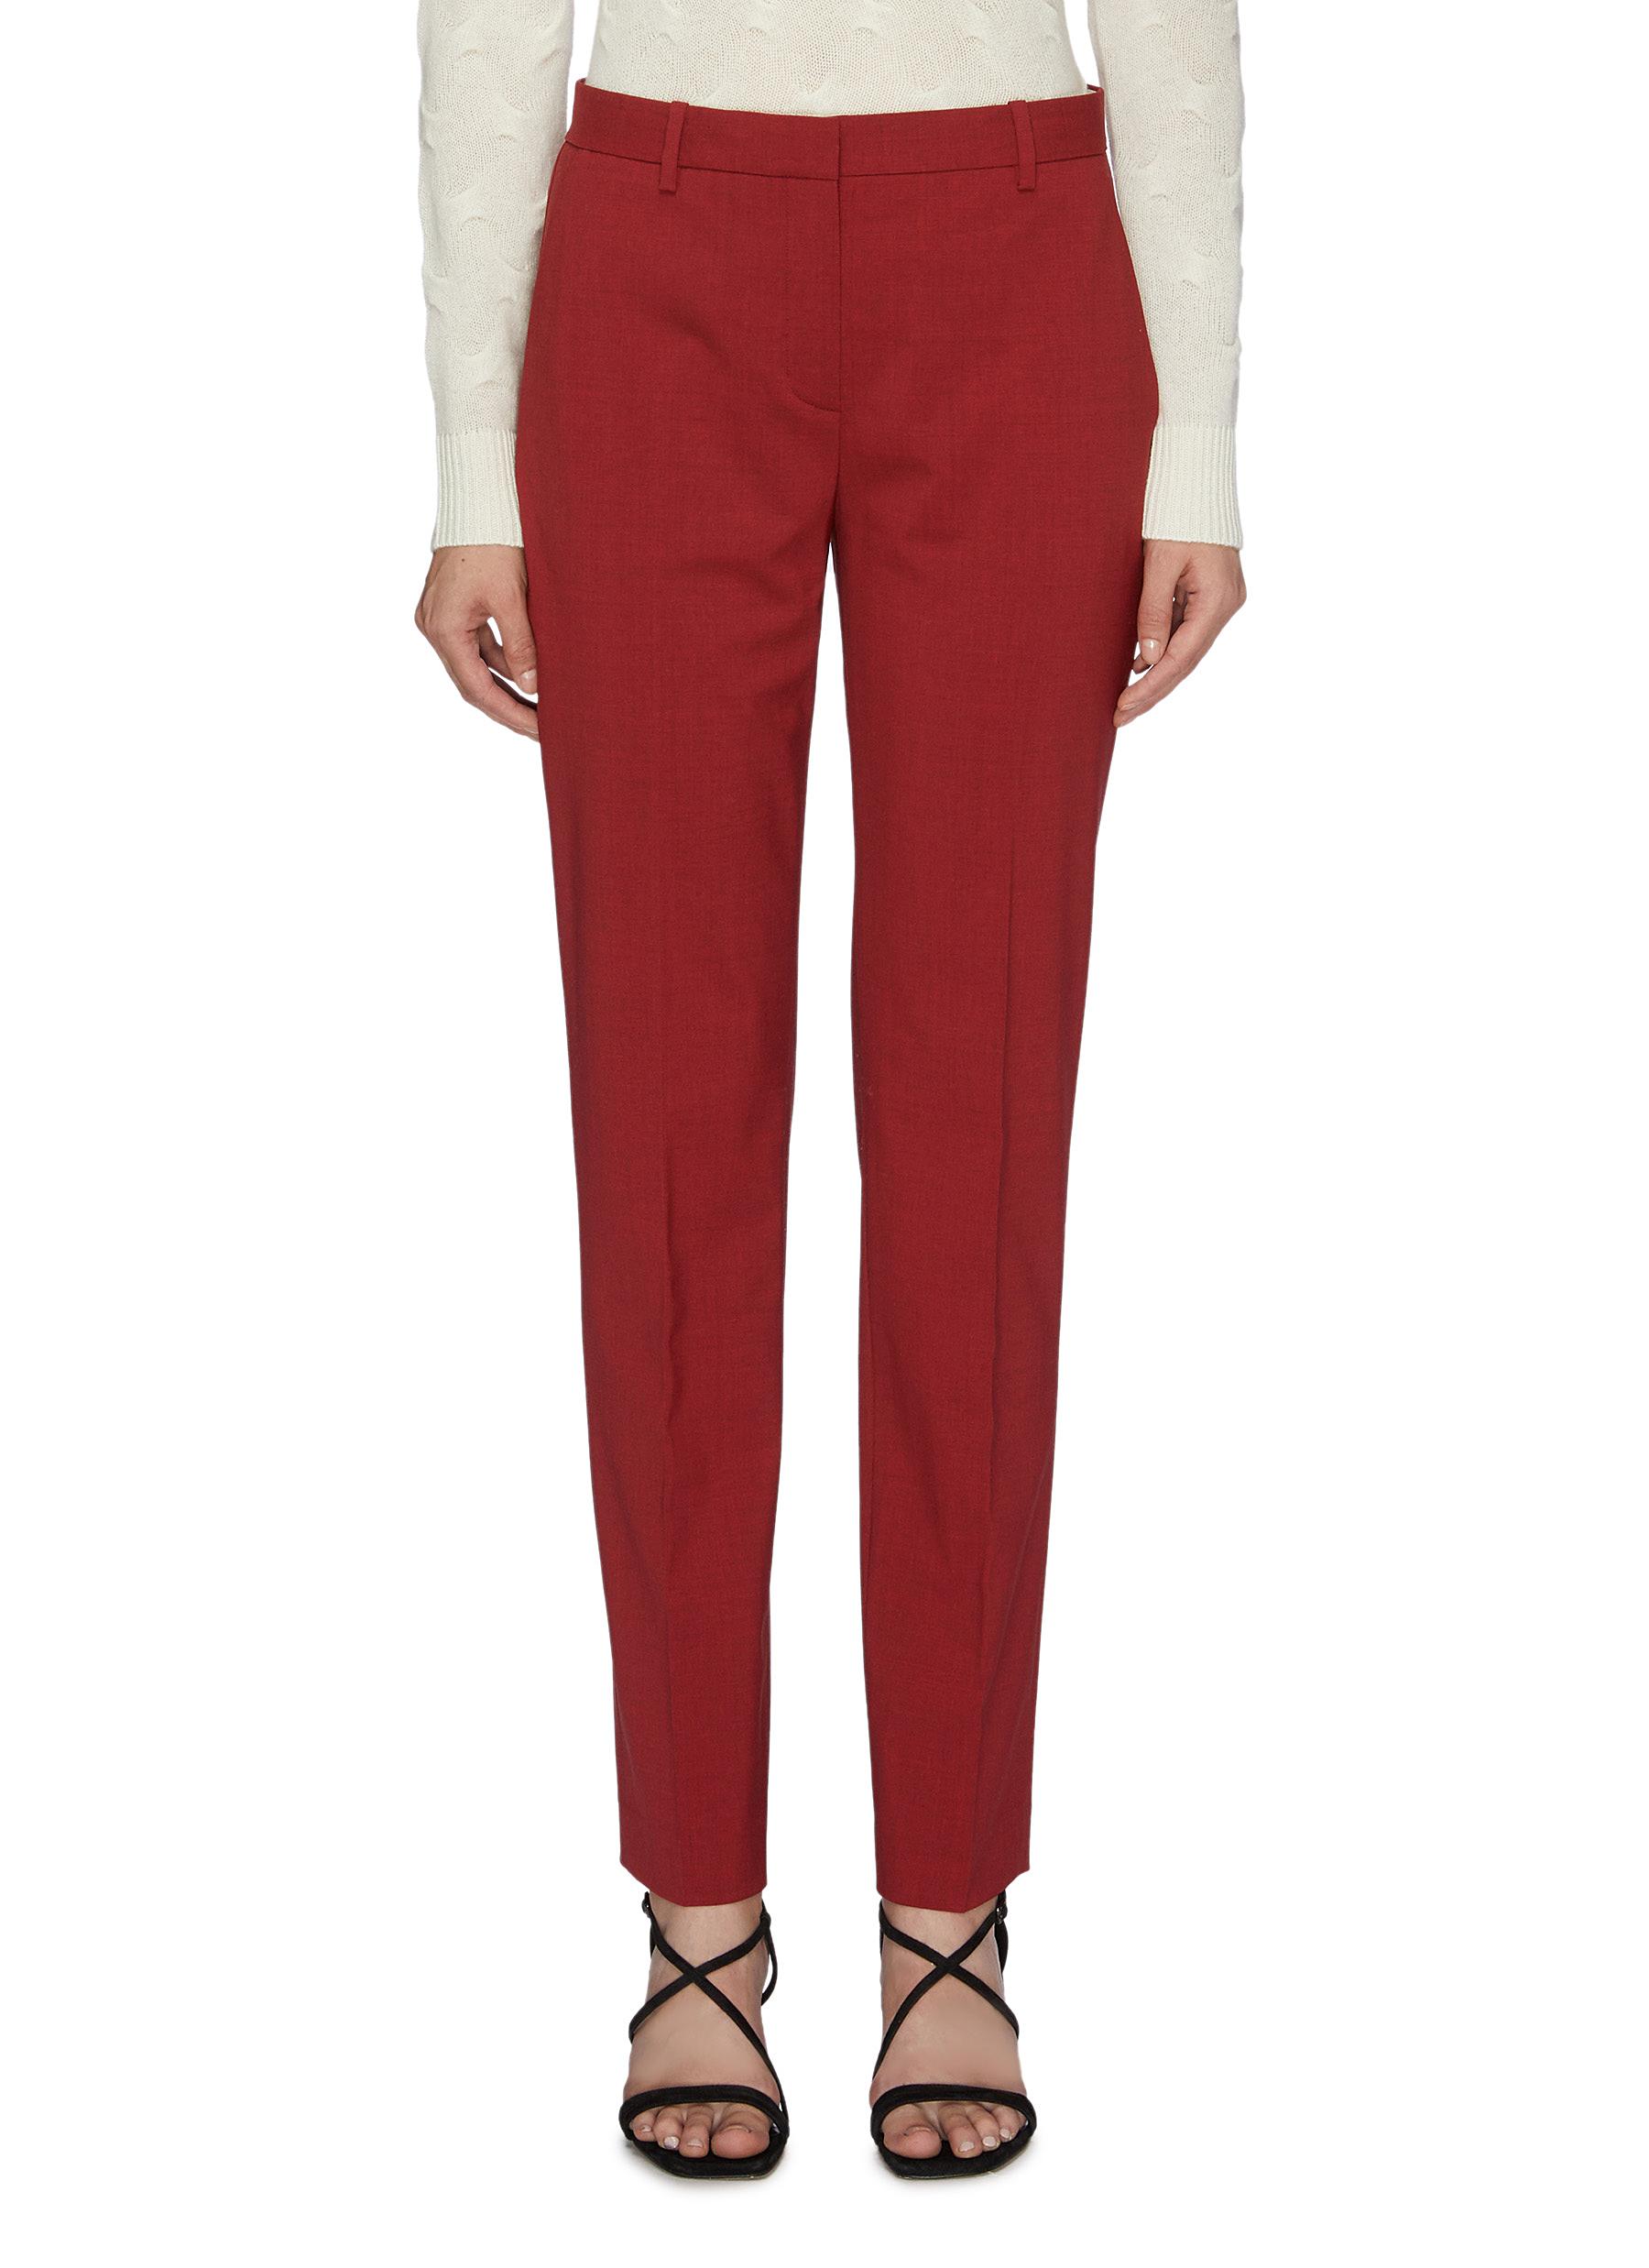 Tapered wool pants by Theory